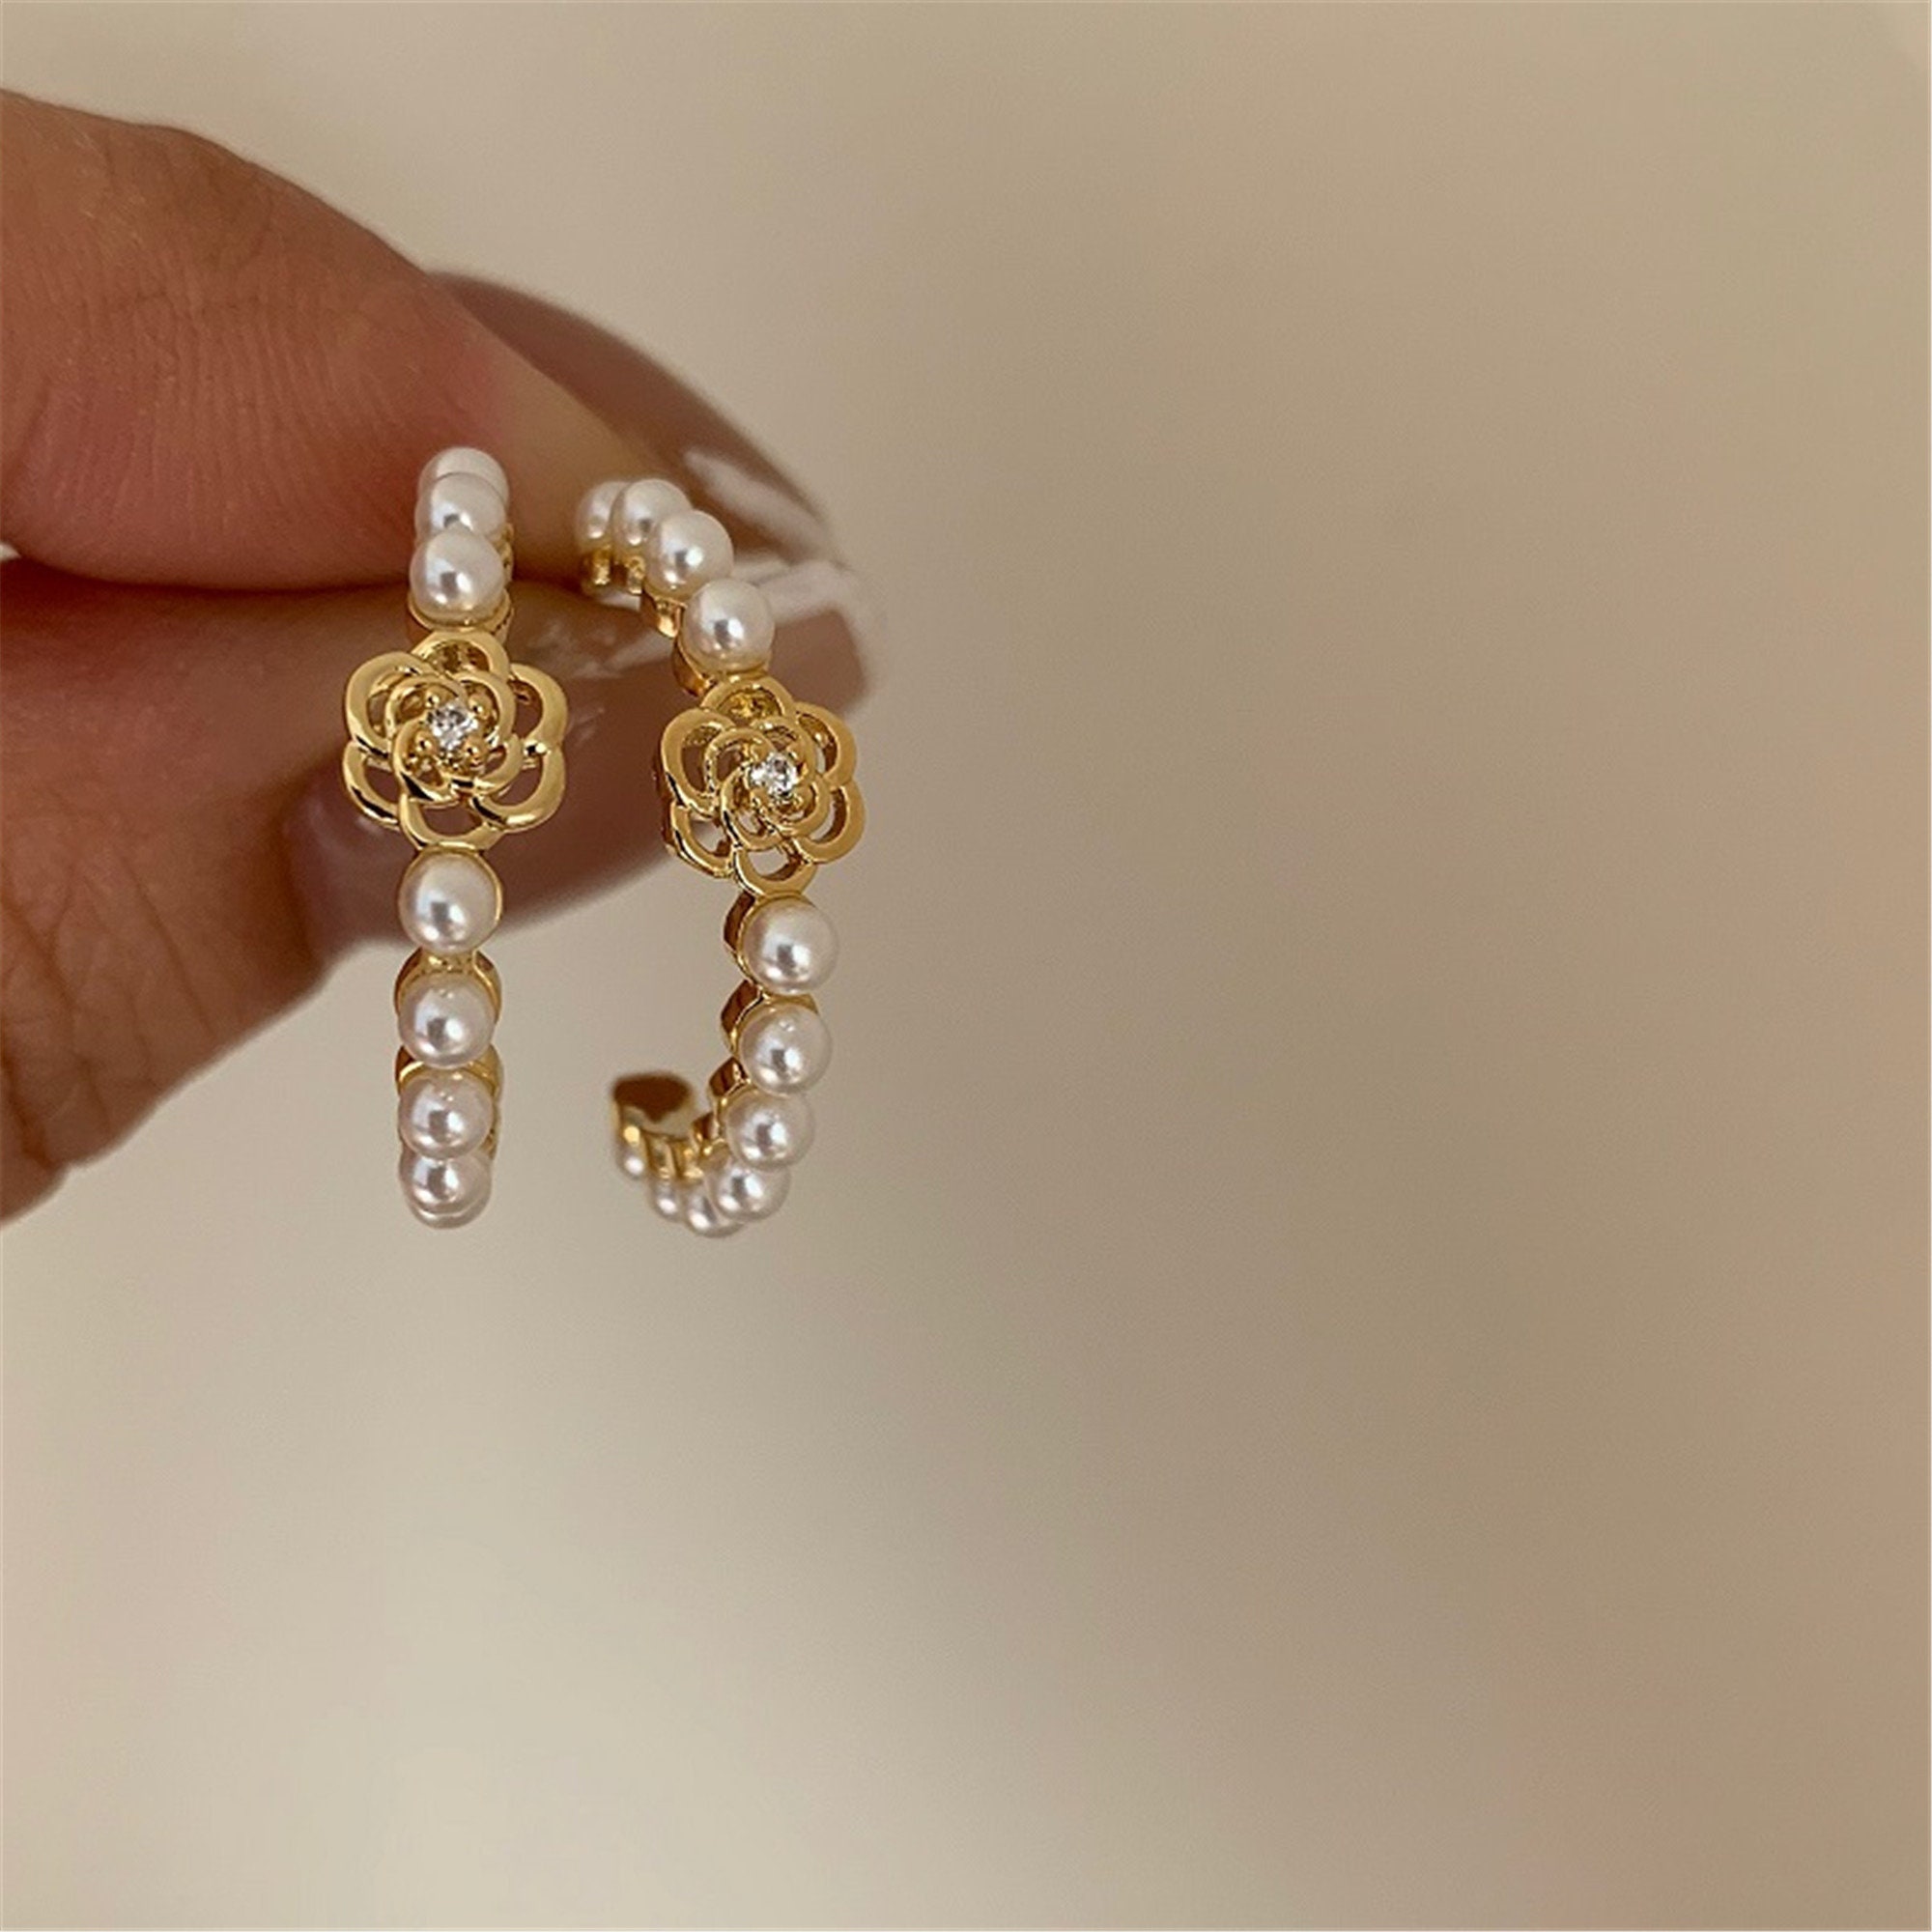 Alloy Hoop Earrings Pretty and Elegant Earrings with a Charm Jewelry Gift Box for Women and Girls 